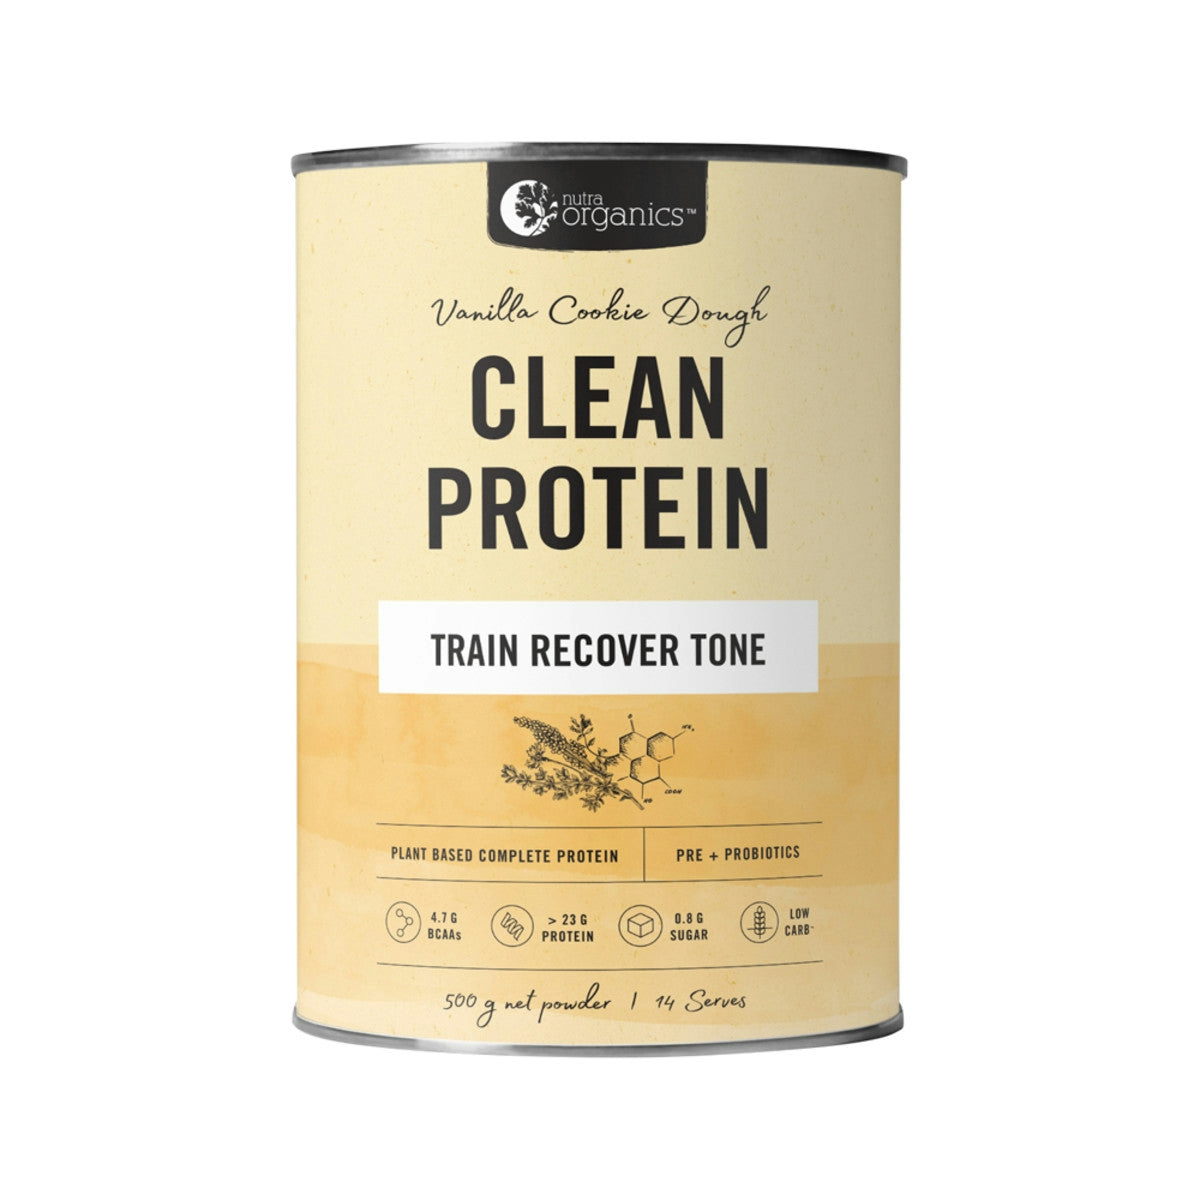 image of Nutra Organics Clean Protein Vanilla Cookie Dough 500g on white background 